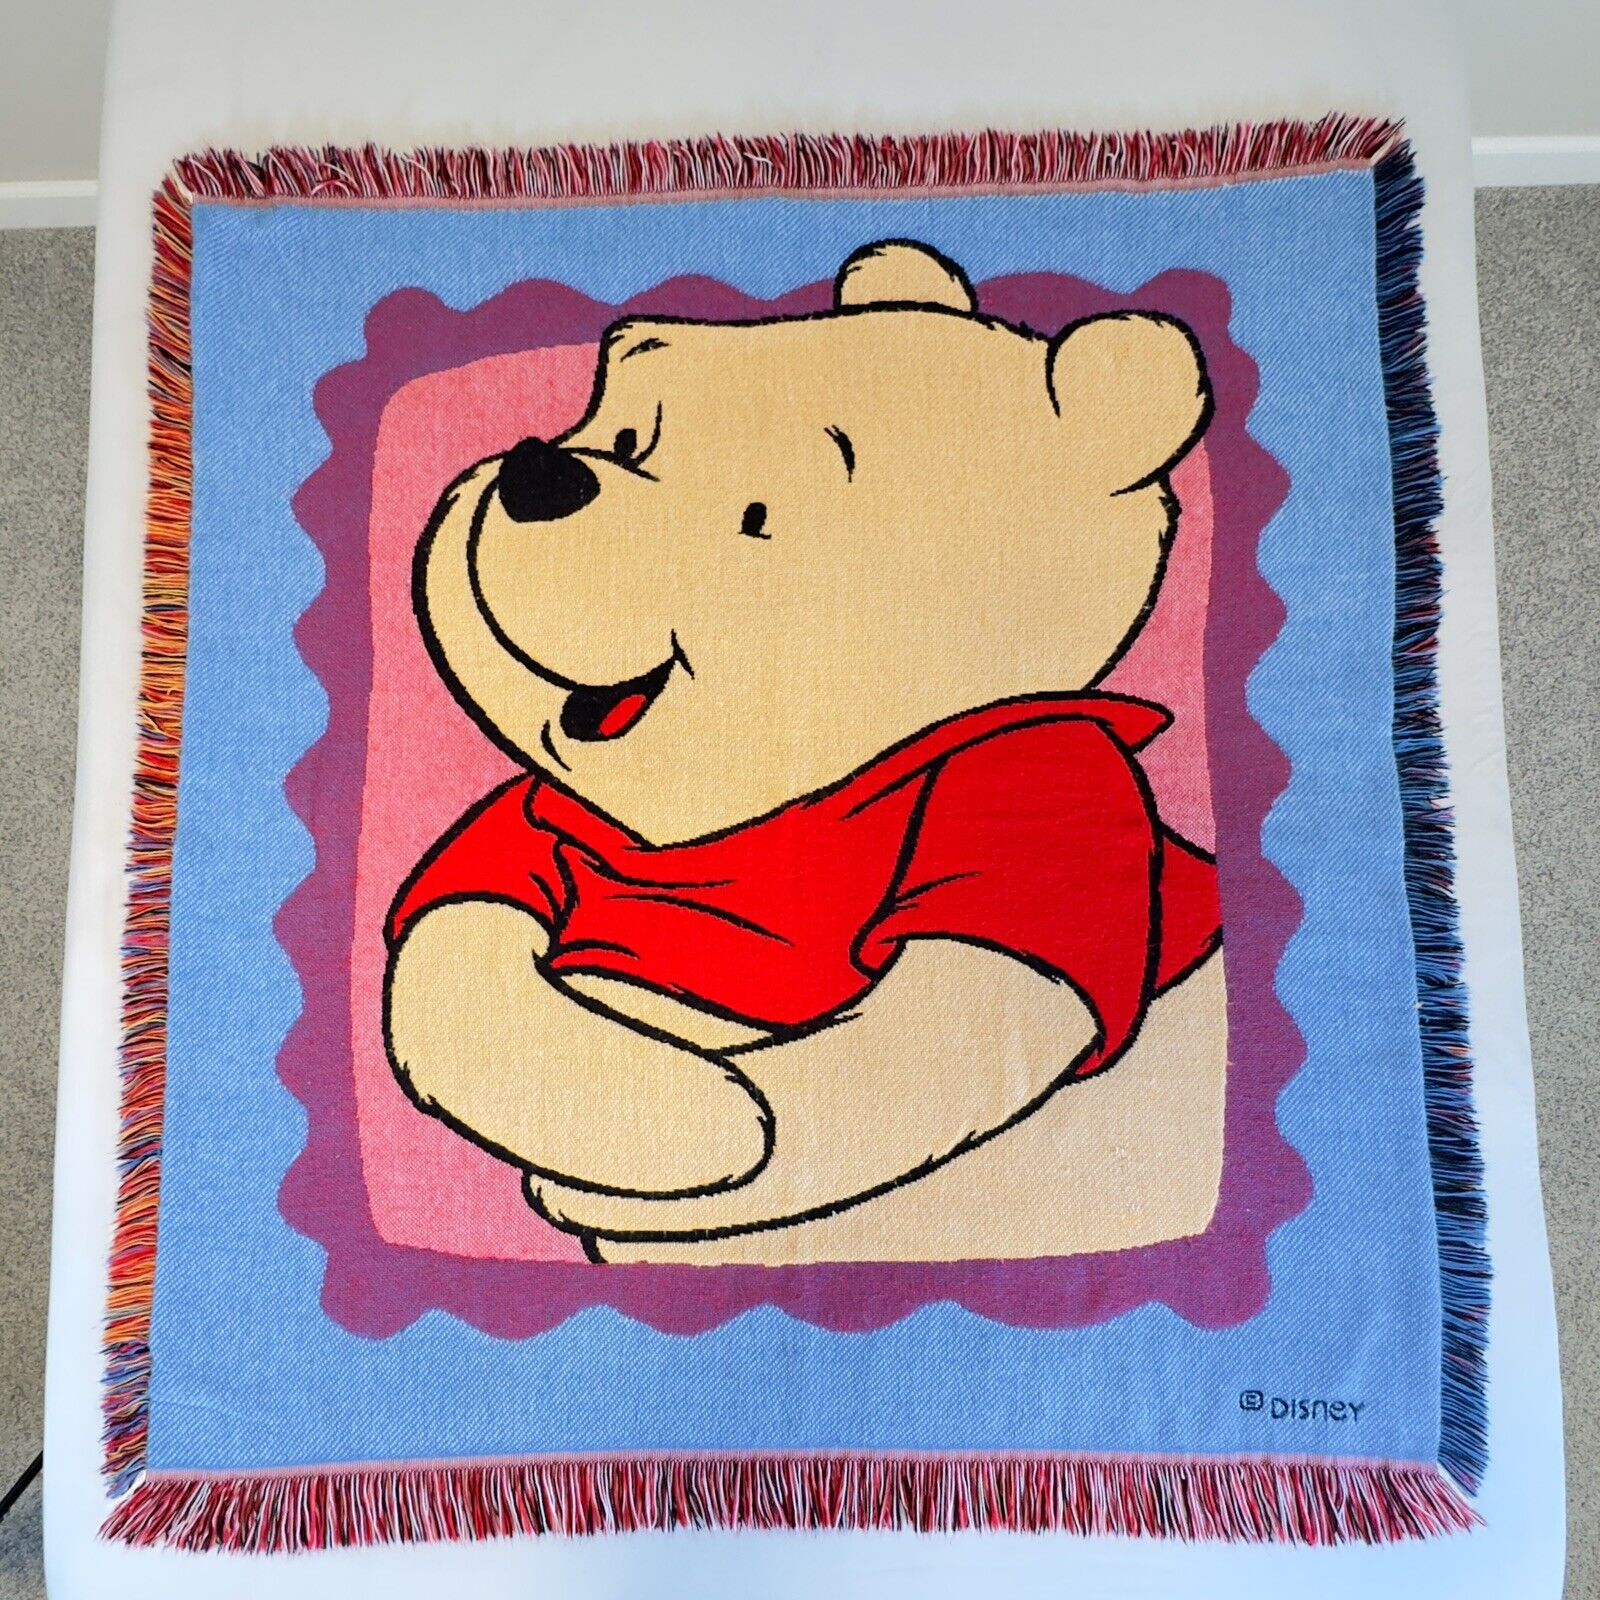 Vintage Disney Winnie The Pooh Woven Fringed Blanket Tapestry Beacon USA